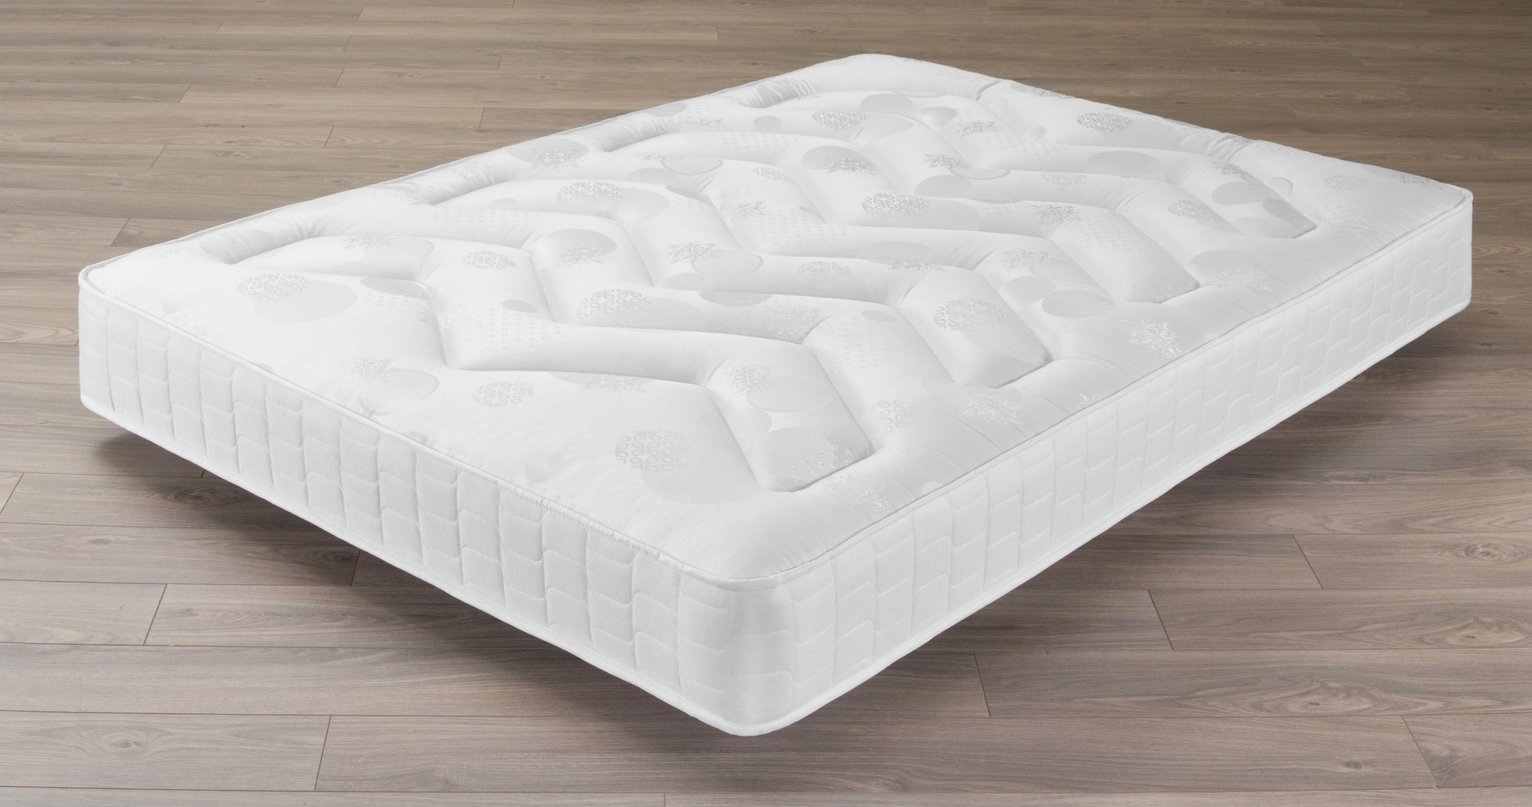 airsprung rosa ortho double mattress review